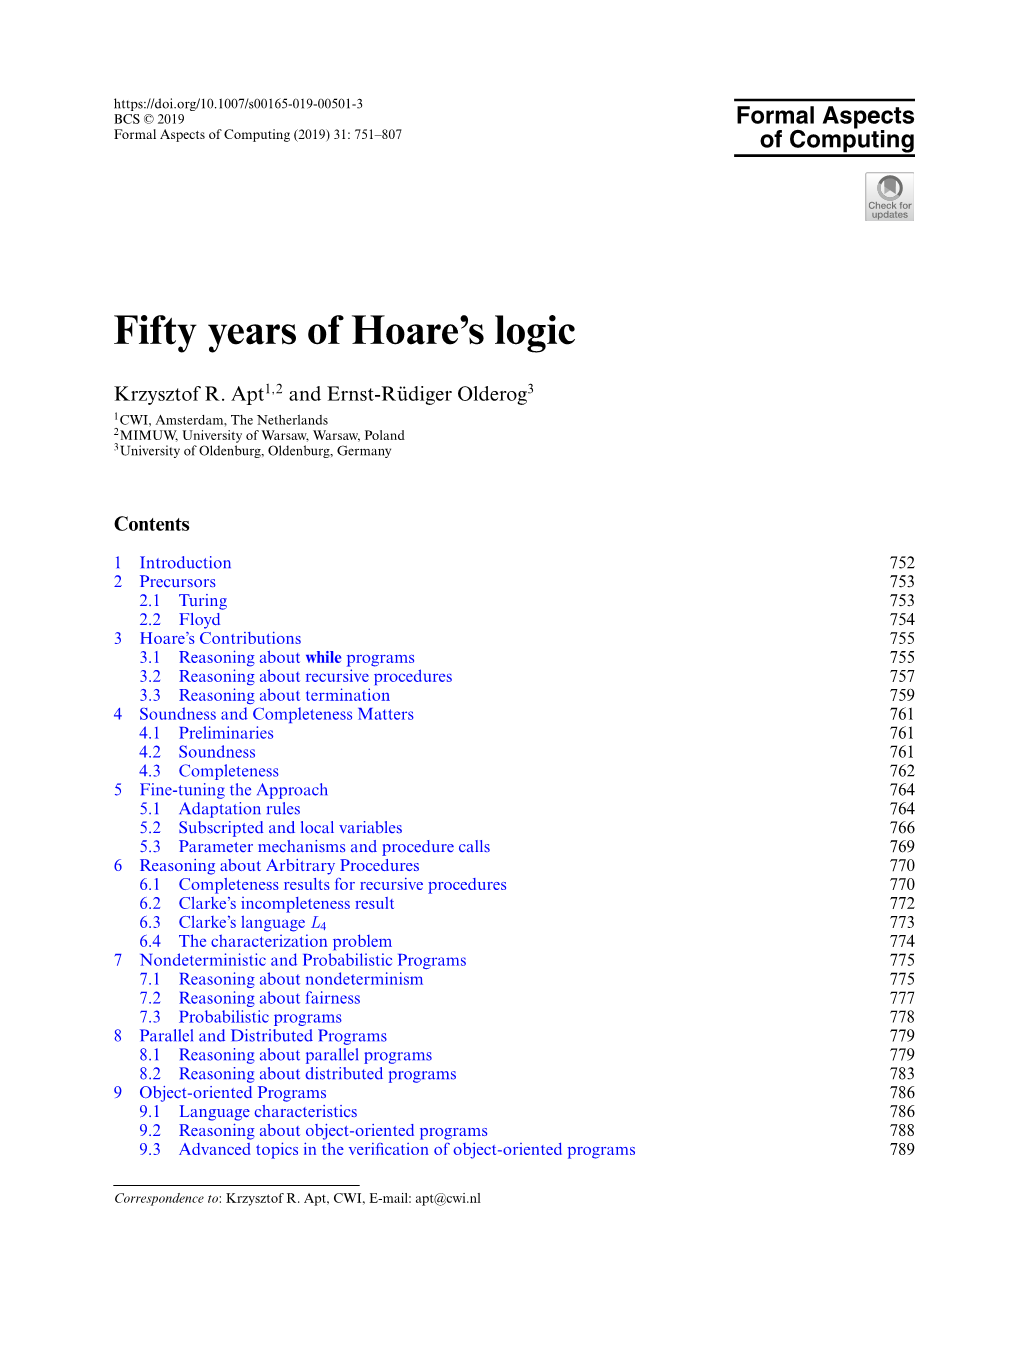 Fifty Years of Hoare's Logic